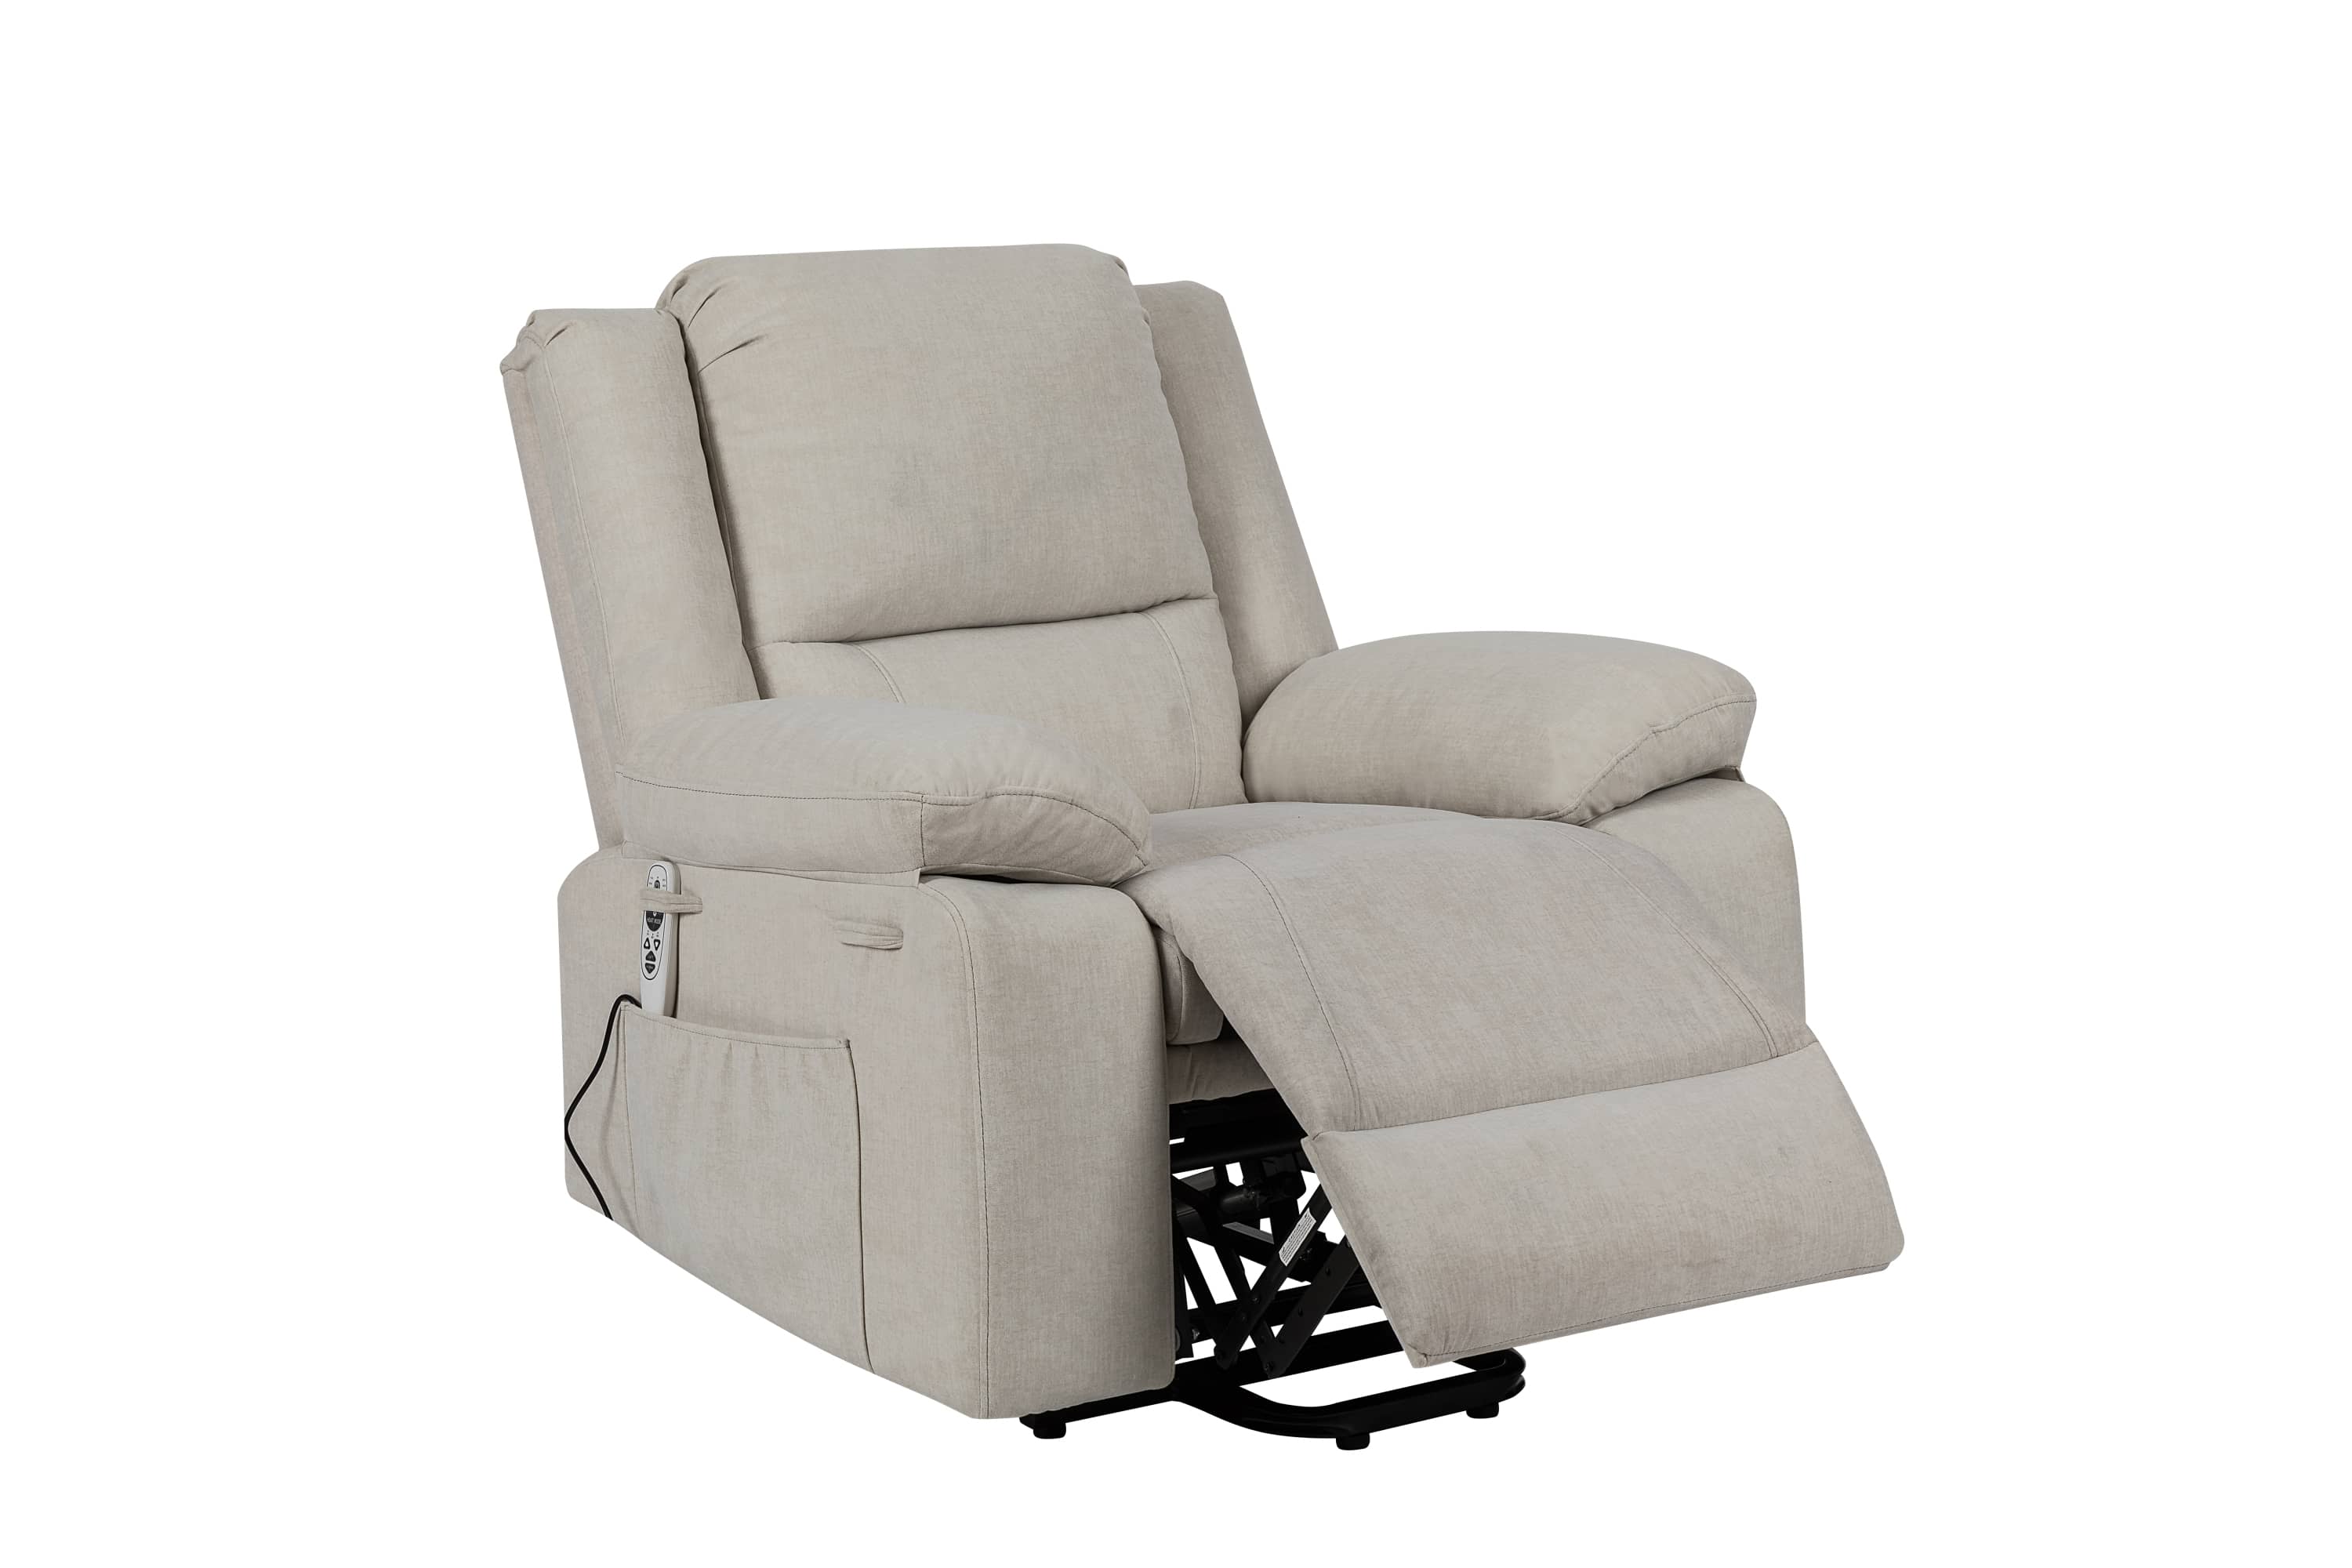 Power Recliner Chair With Massage and Cushion Heating, Beige, angle view - My Lift Chair